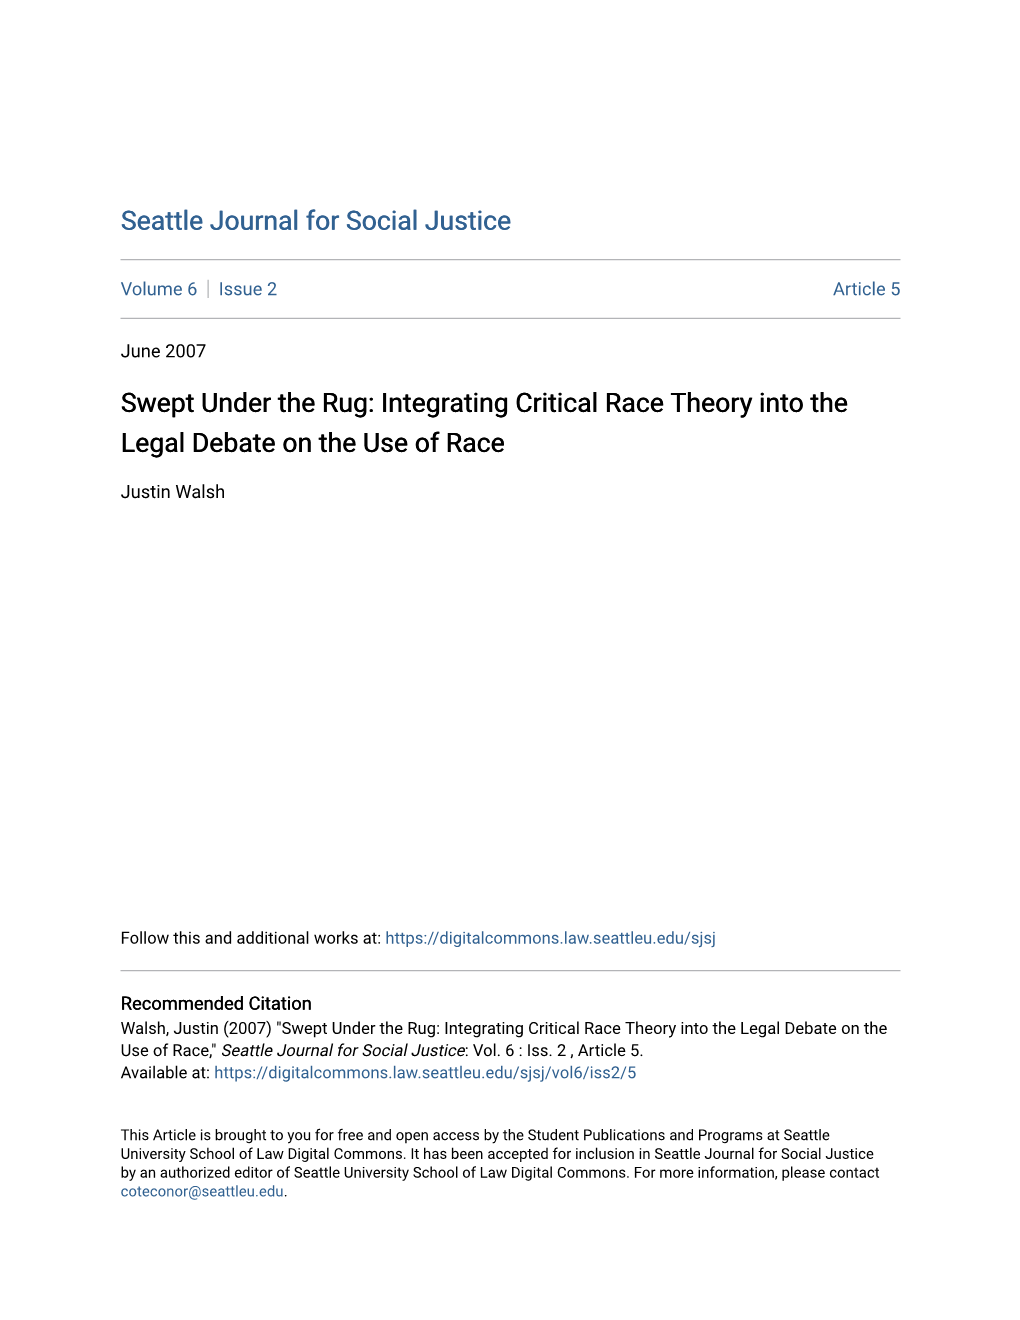 Swept Under the Rug: Integrating Critical Race Theory Into the Legal Debate on the Use of Race